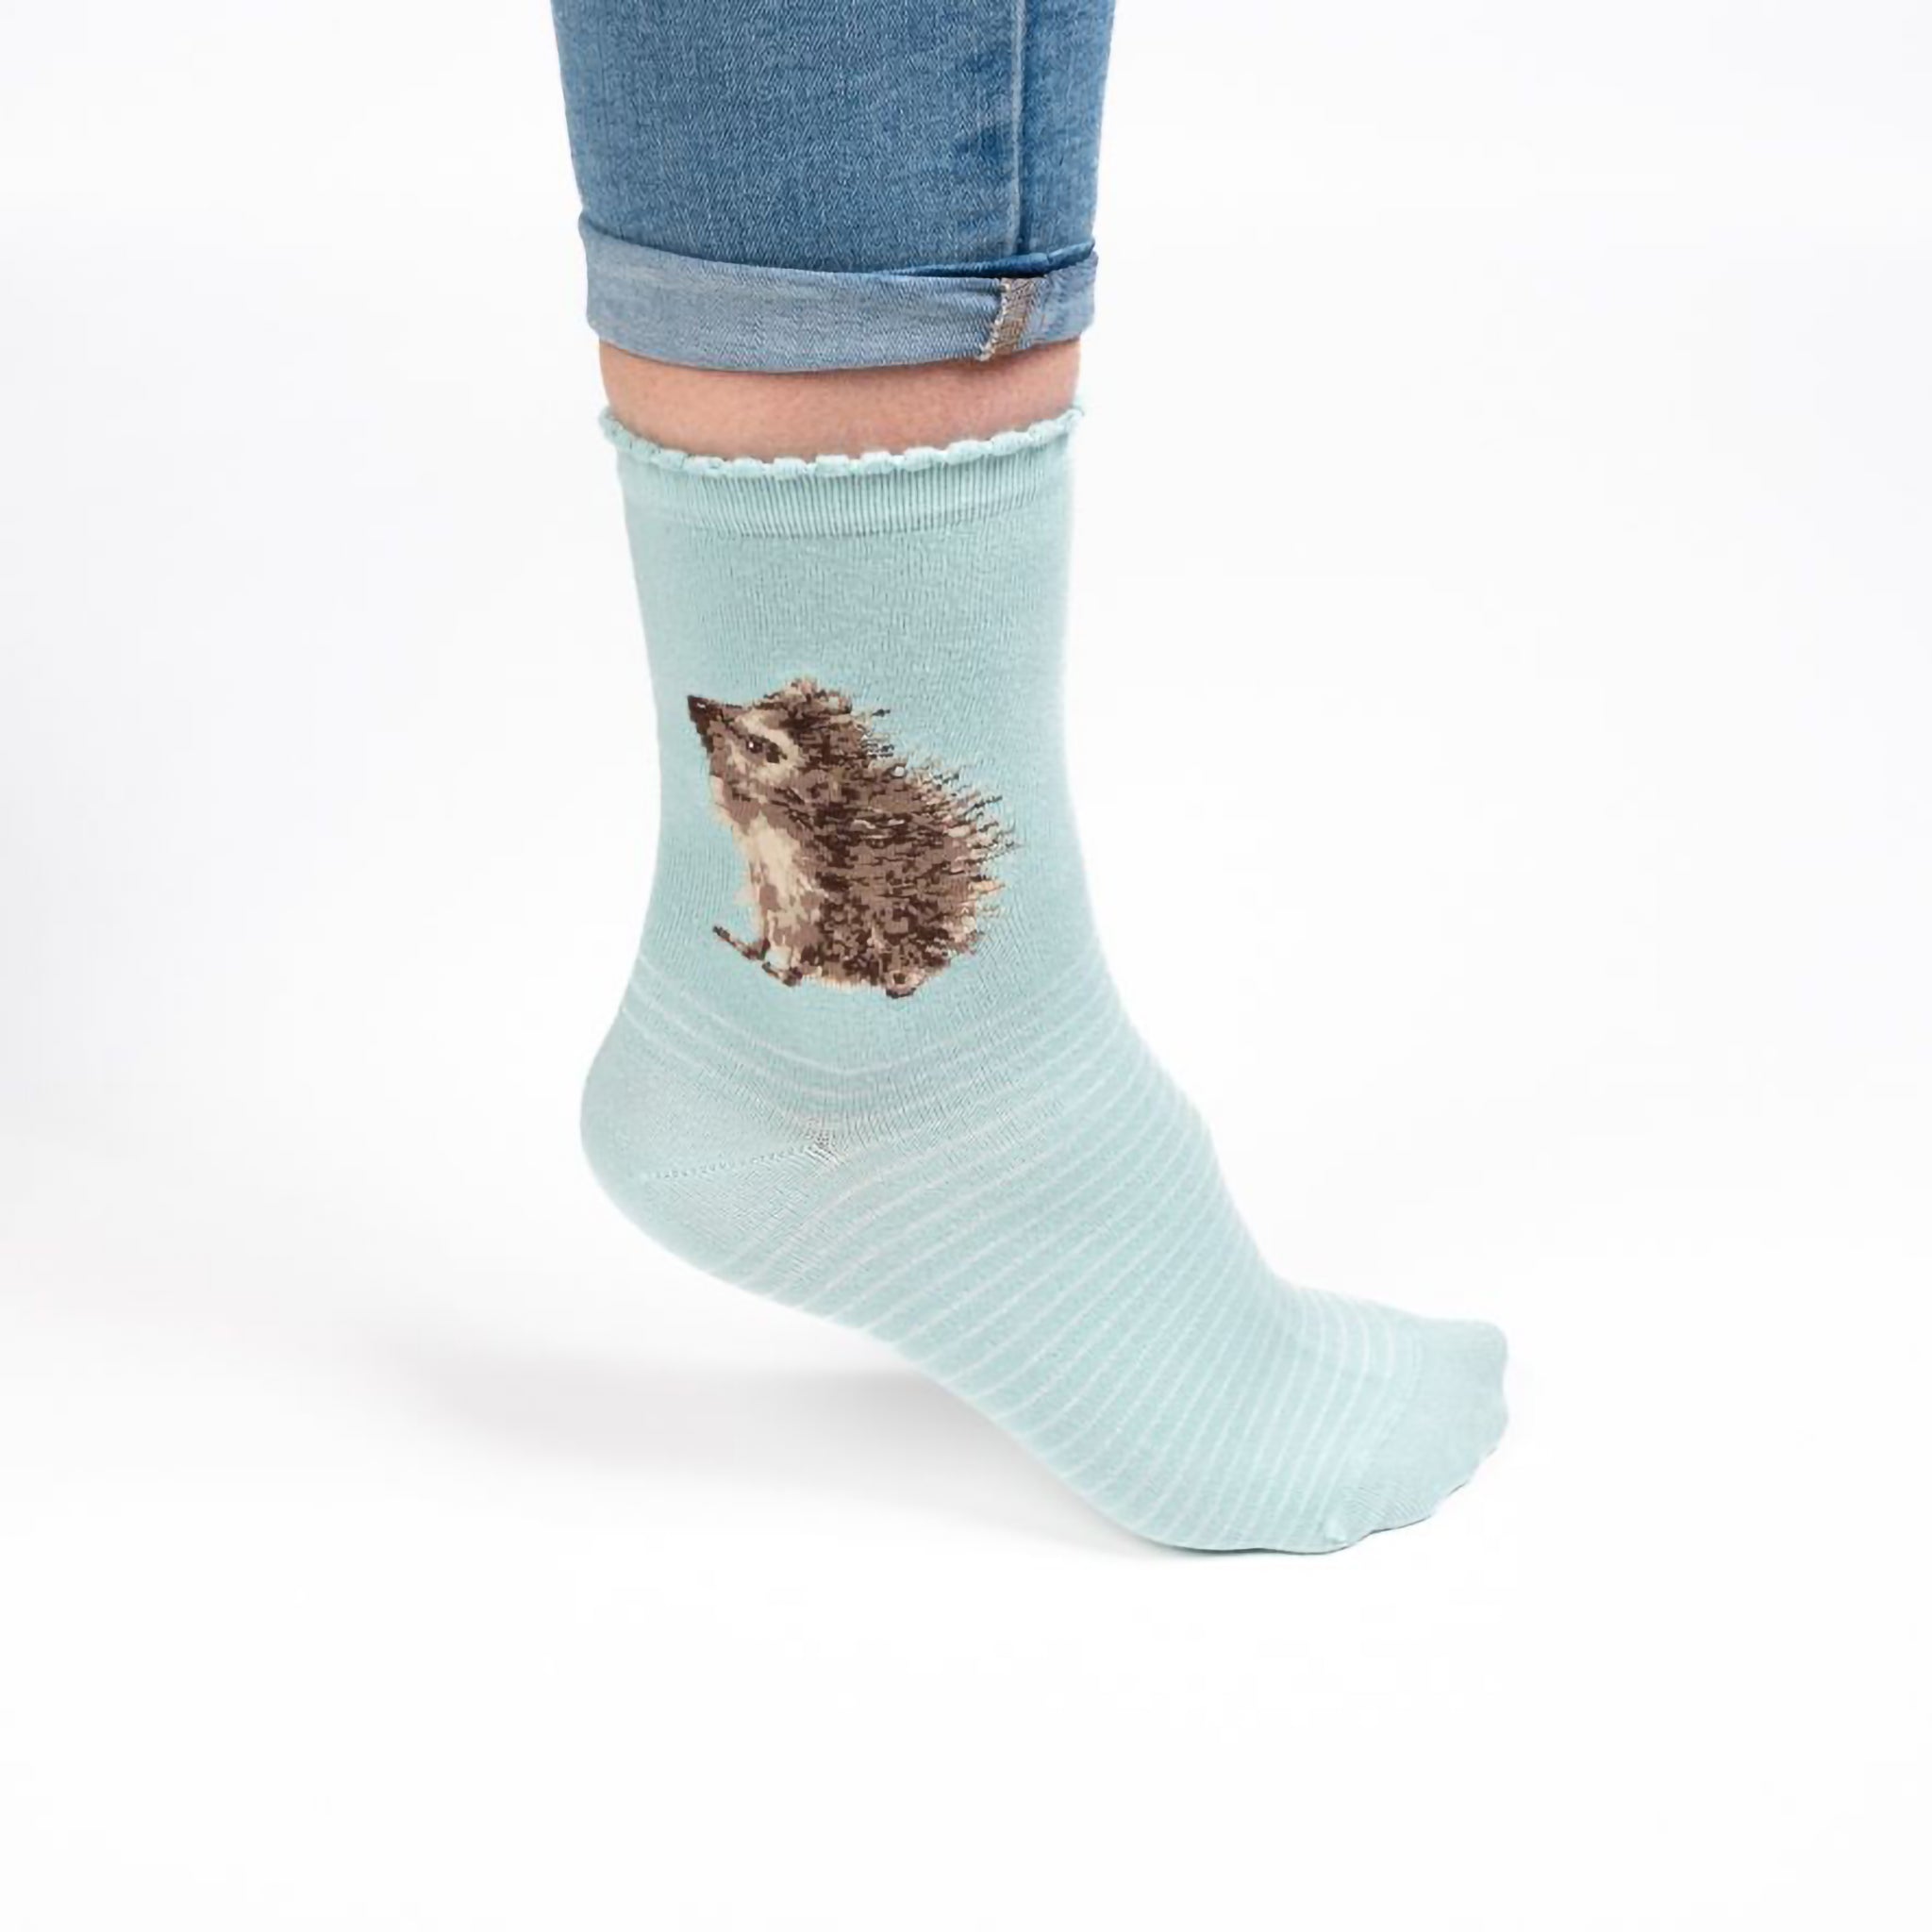 A model wearing a pair of mint green socks with a hedgehog picture and white stripes